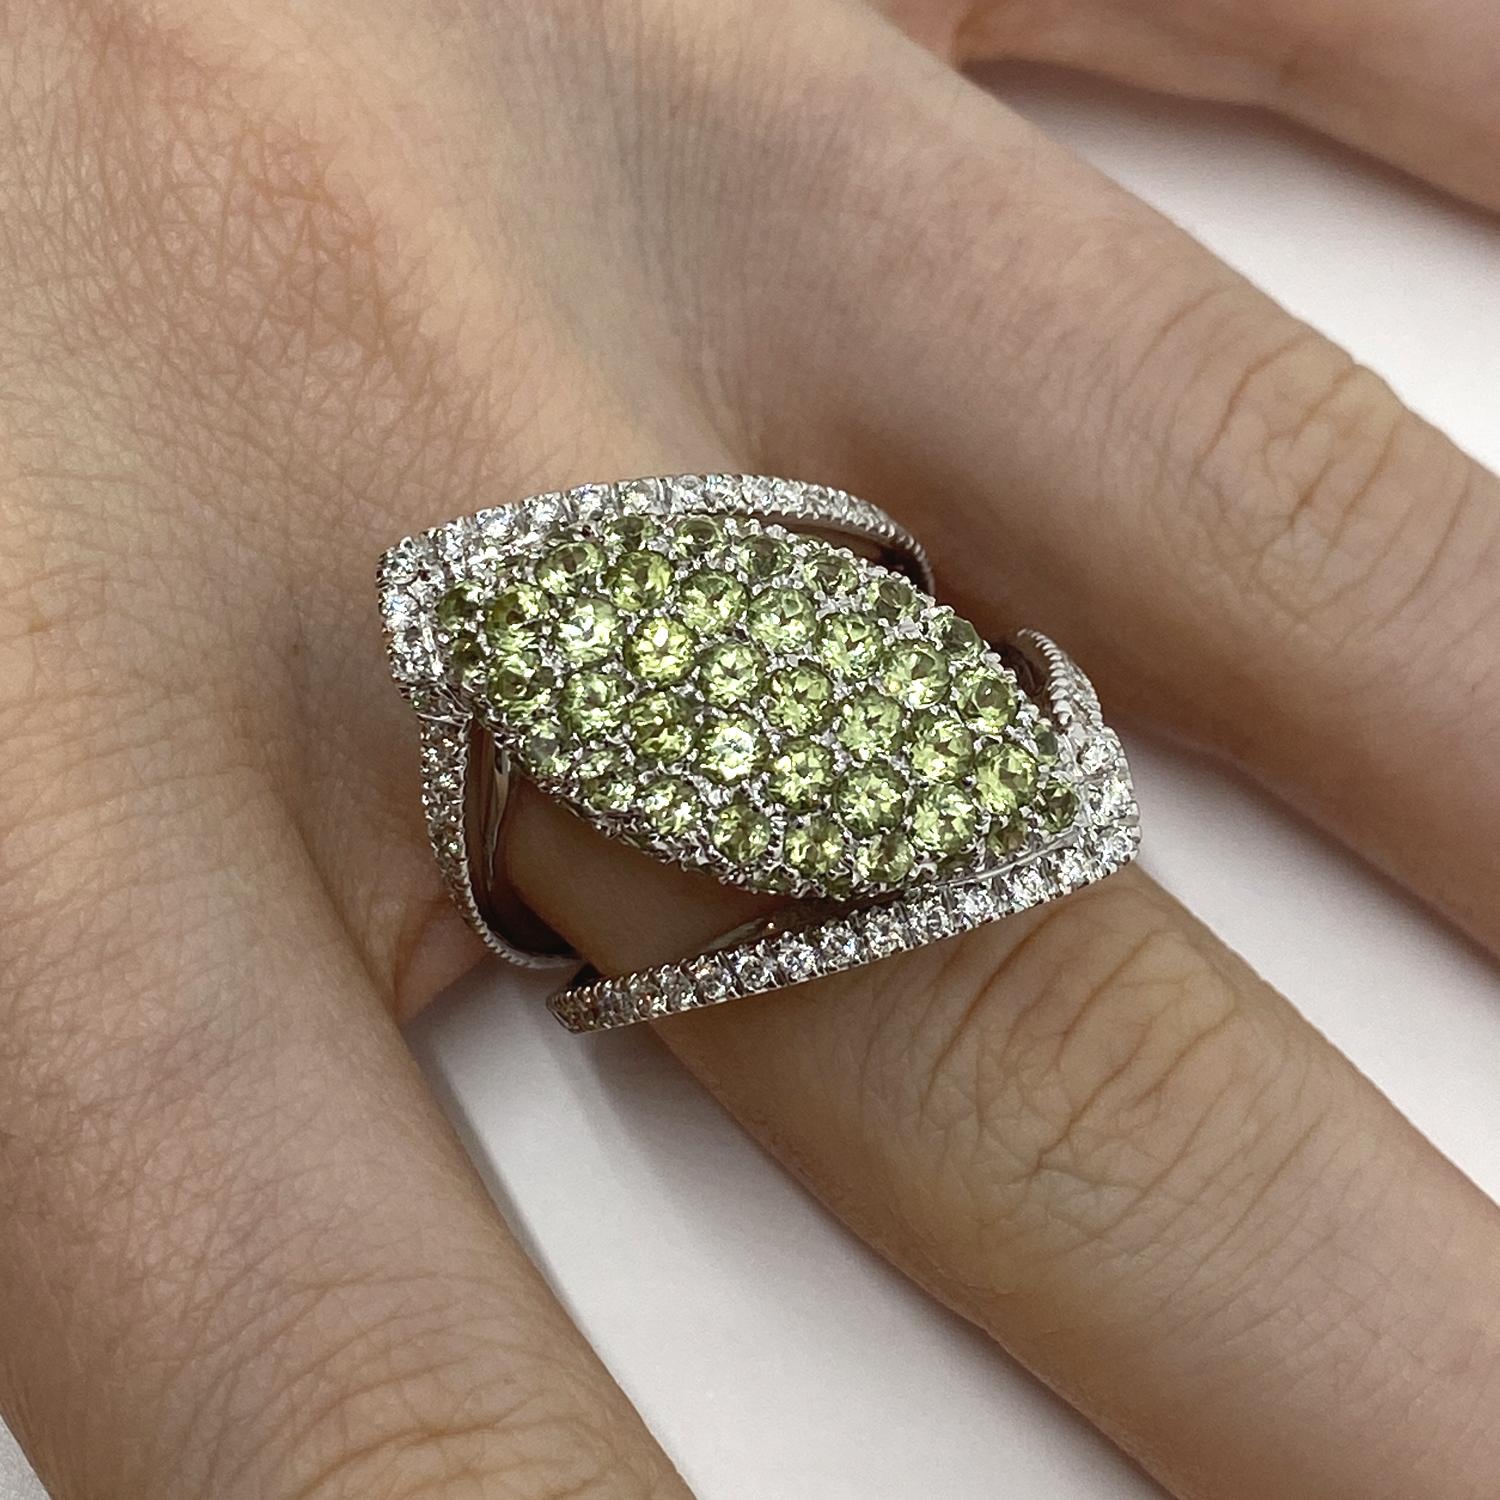 Ring made of 18kt white gold with natural brilliant-cut green peridot for ct.2.76 and natural brilliant-cut white diamonds for ct.0.82

Welcome to our jewelry collection, where every piece tells a story of timeless elegance and unparalleled